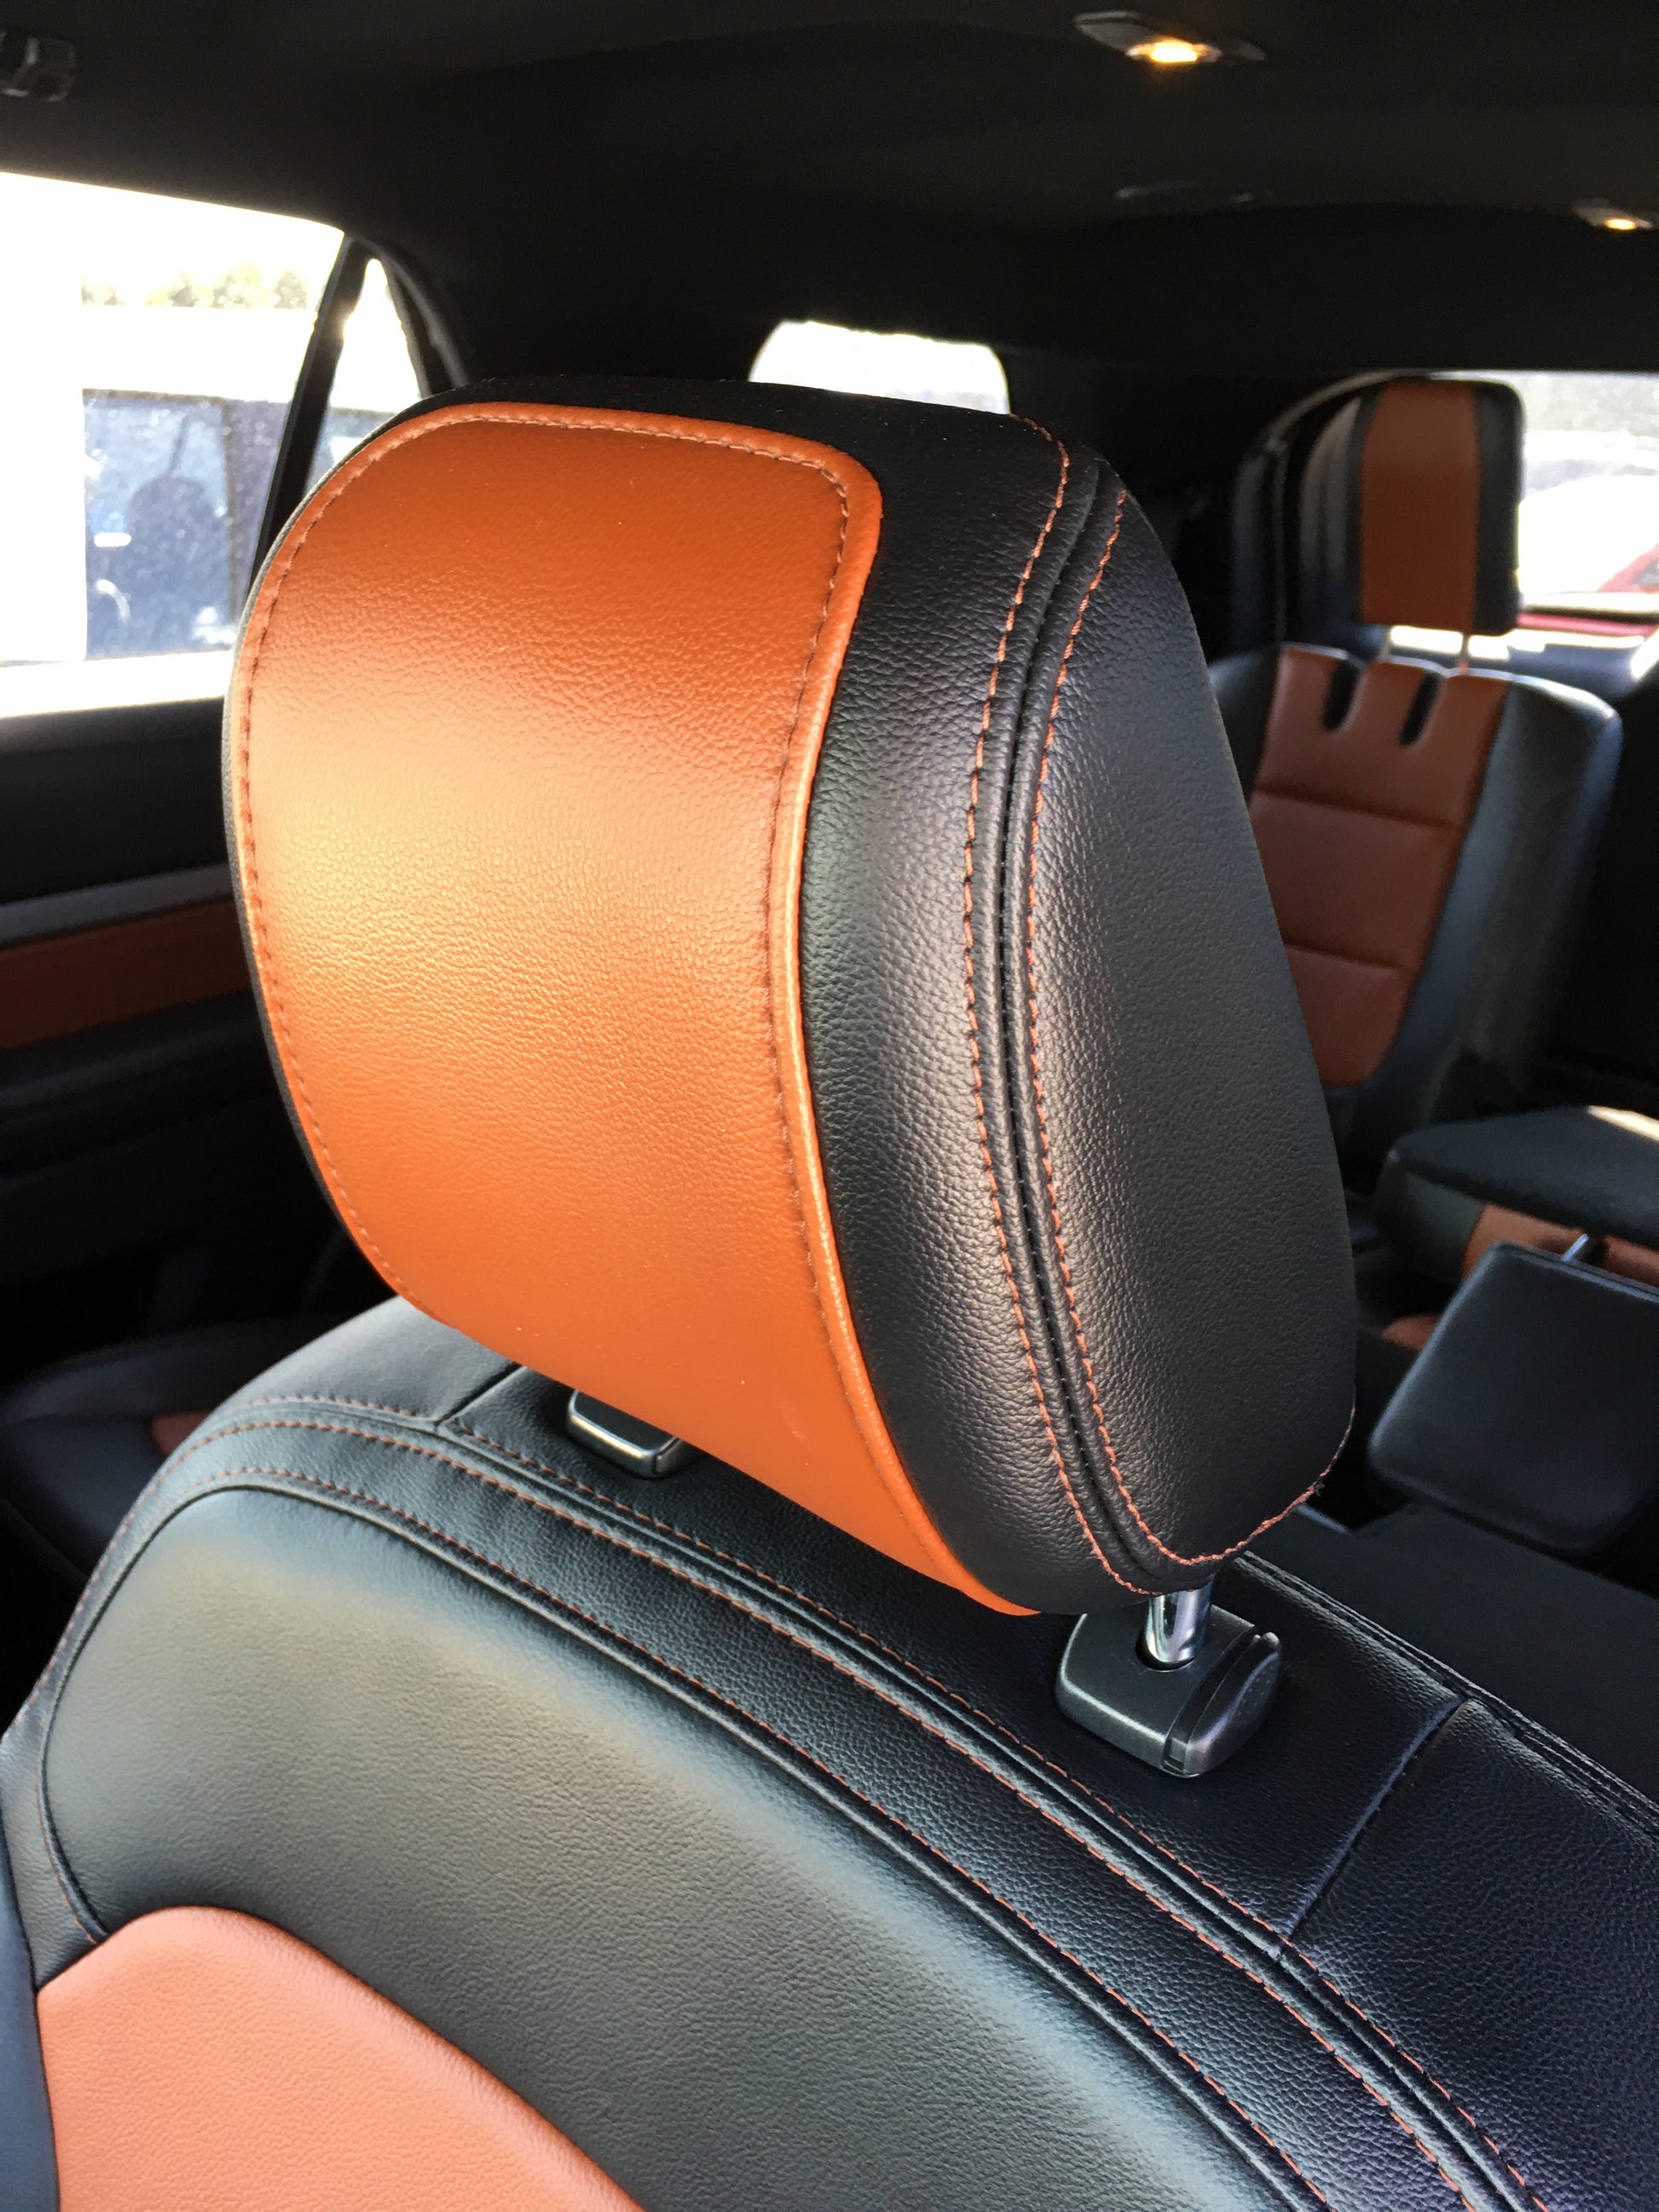 Auto Headrest Upholstery in Leather or Cloth – MOBILE RESTORATION